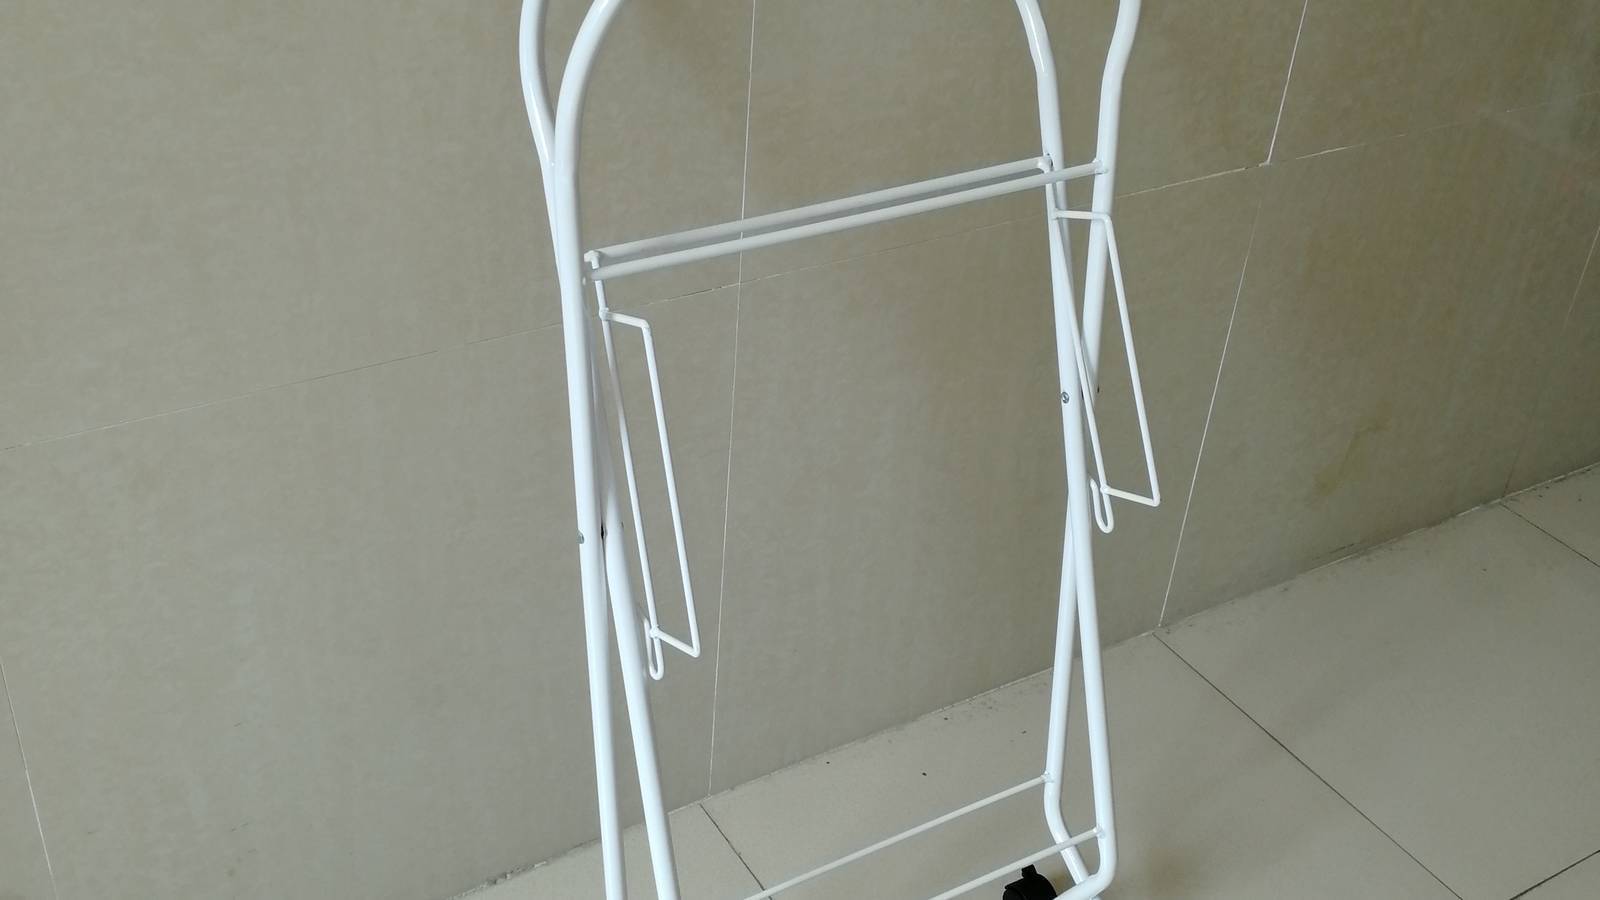 Aoqi reliable mothercare bath stand factory price for kchildren